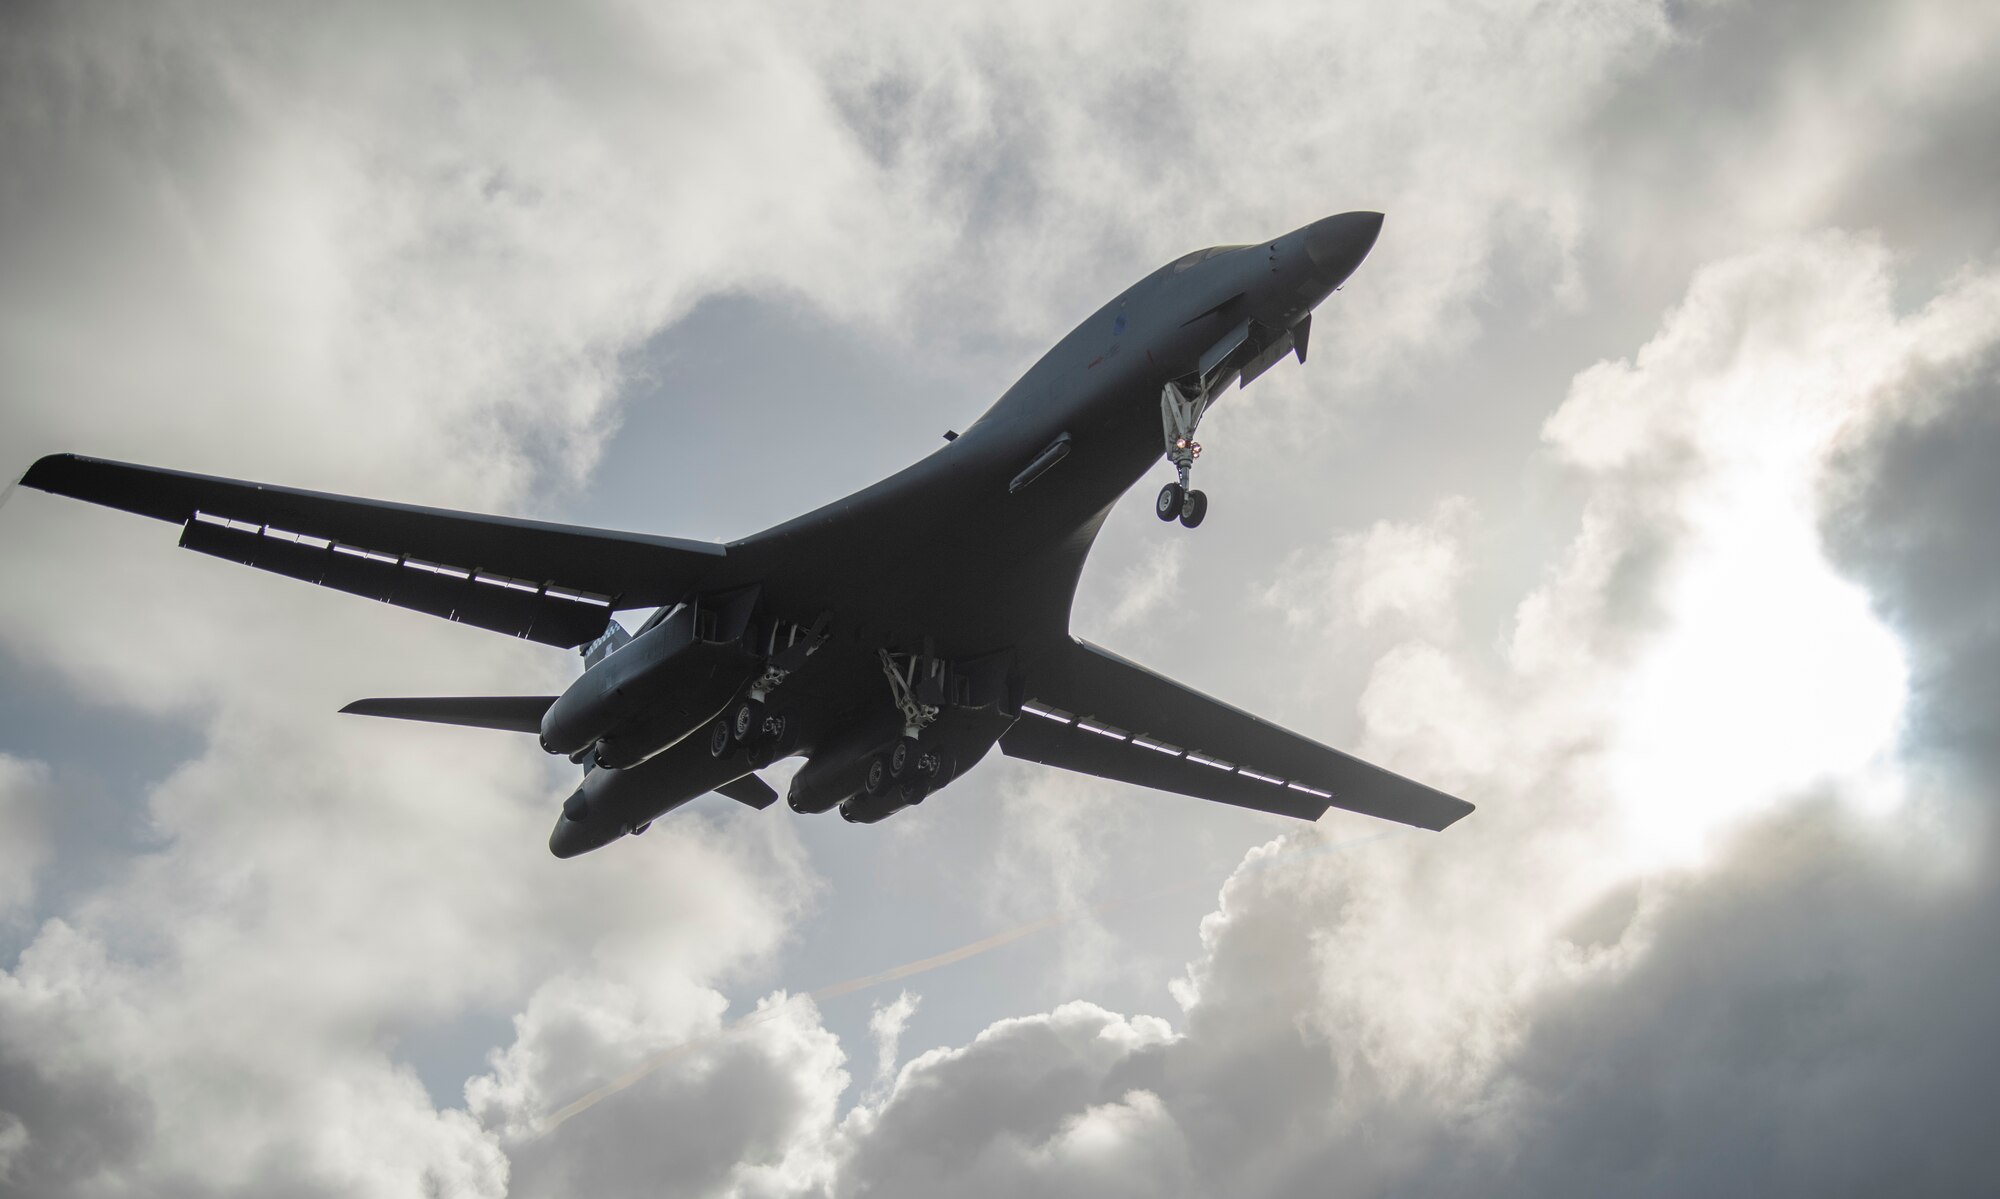 A 9th Expeditionary Bomb Squadron B-1B Lancer lands at Andersen Air Force Base, Guam, May 4, 2020, after completing a training mission in the East China Sea. The squadron is deployed to Guam for a Bomber Task Force deployment. BTFs support the National Defense Strategy objective of being strategically predictable and operationally unpredictable. (U.S. Air Force photo by Senior Airman River Bruce)